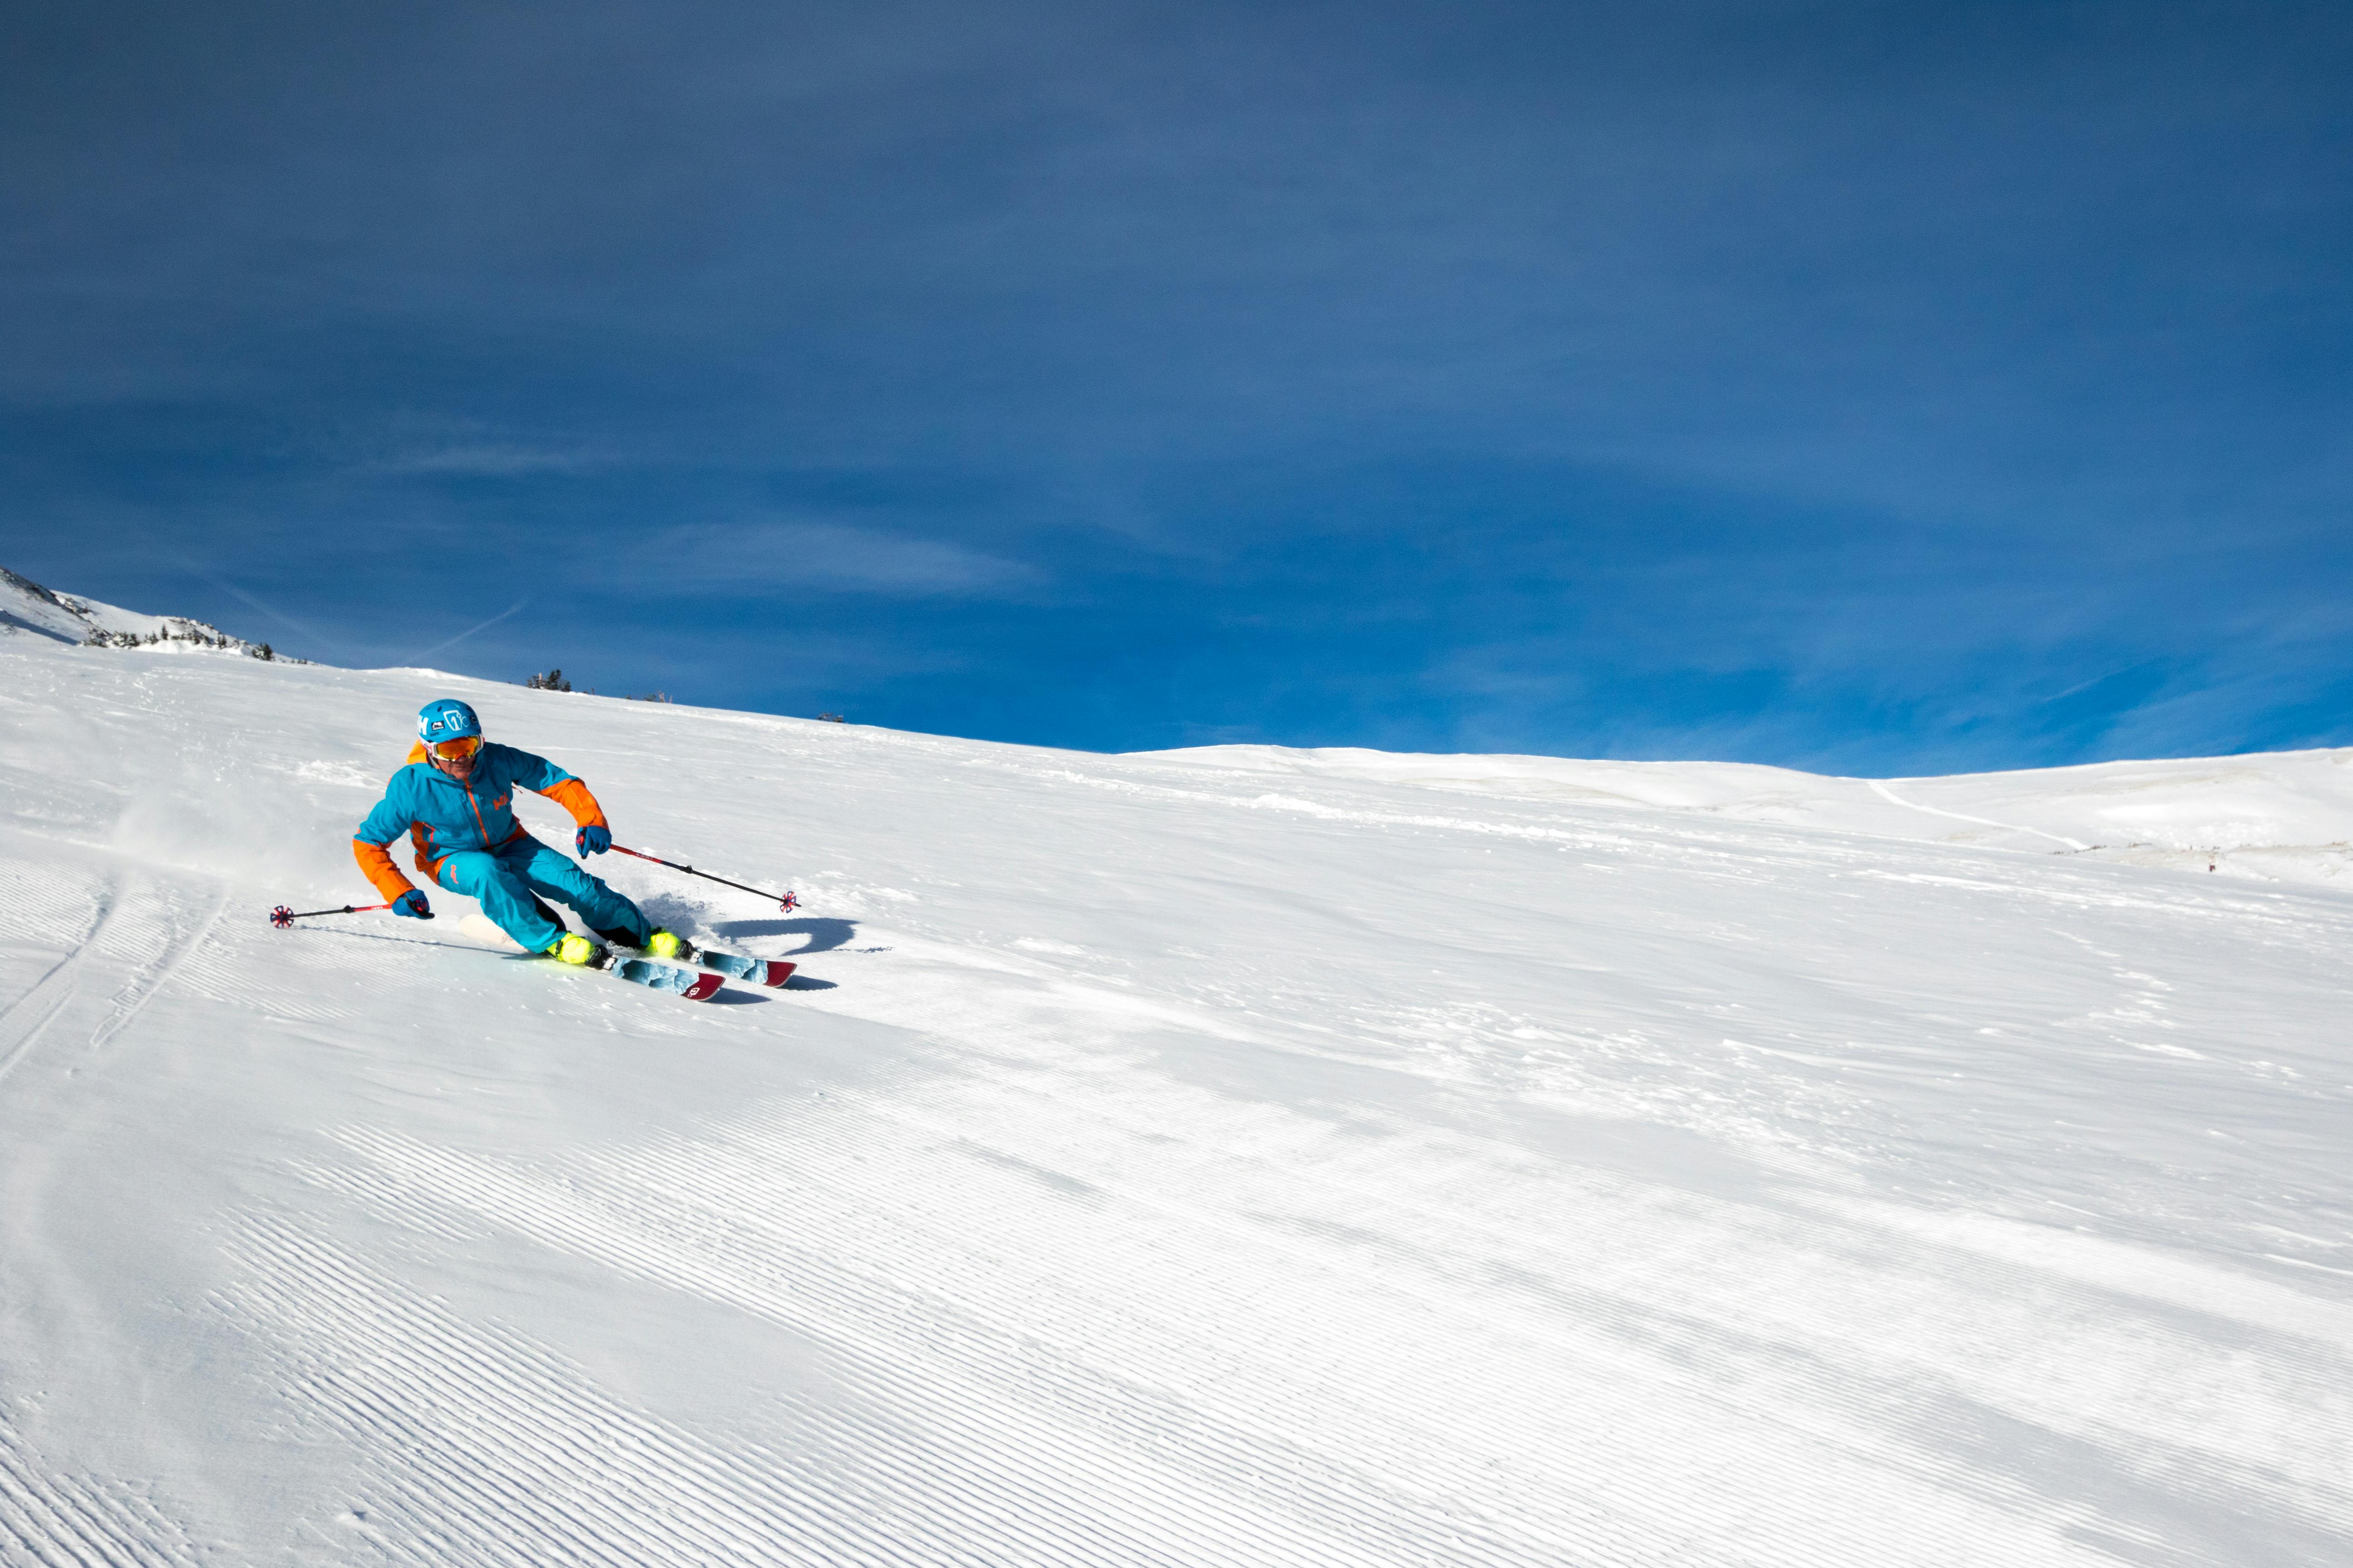 A man in a blue and orange ski jacket and pants skiing fast down a steep groomer slope